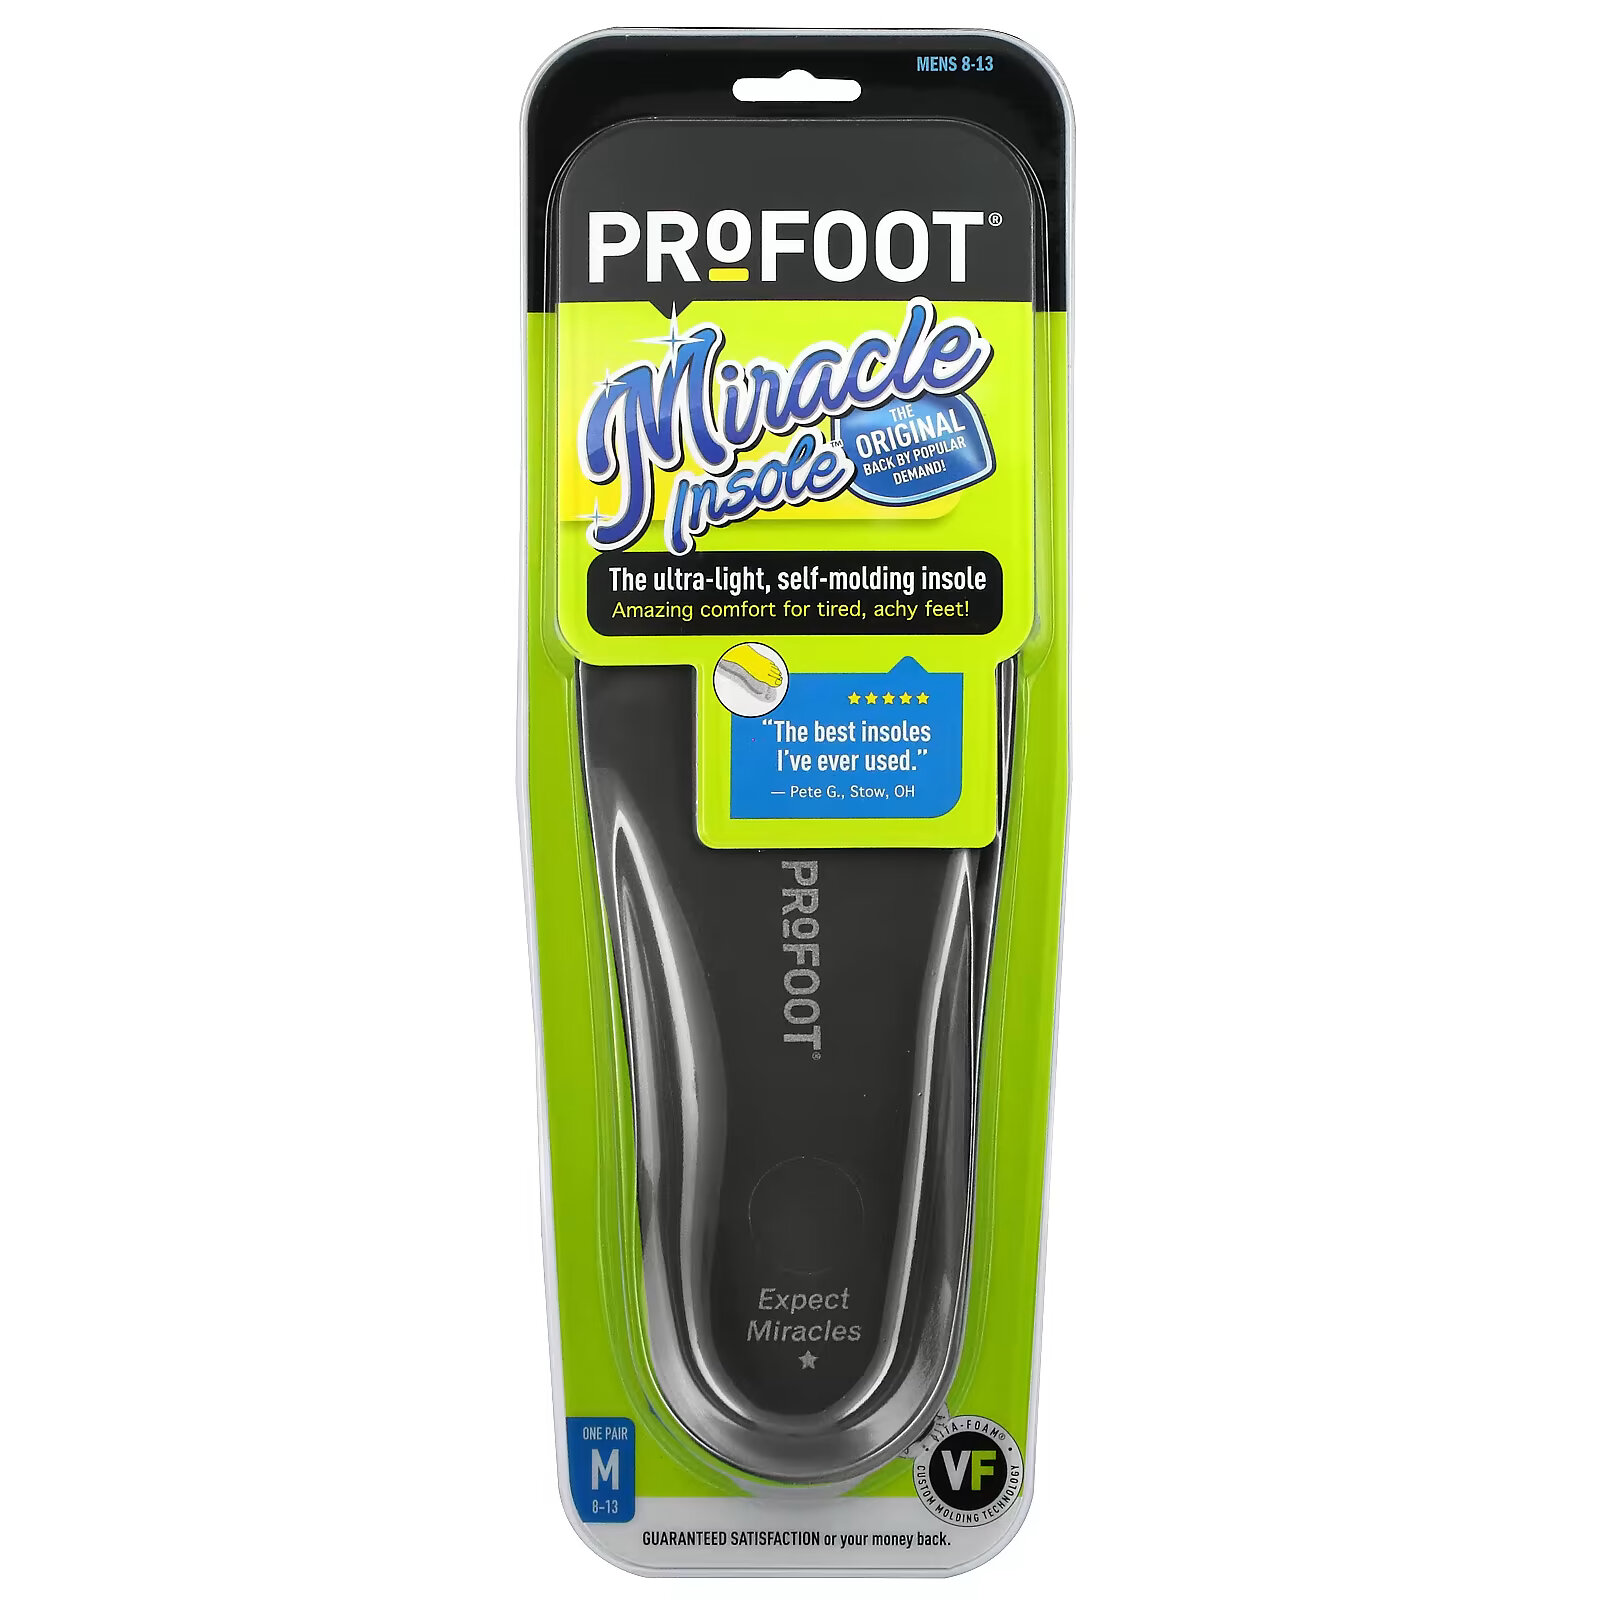 Profoot, Miracle Insole, мужская 8-13, 1 пара profoot miracle insole для женщин 6–10 лет 1 пара